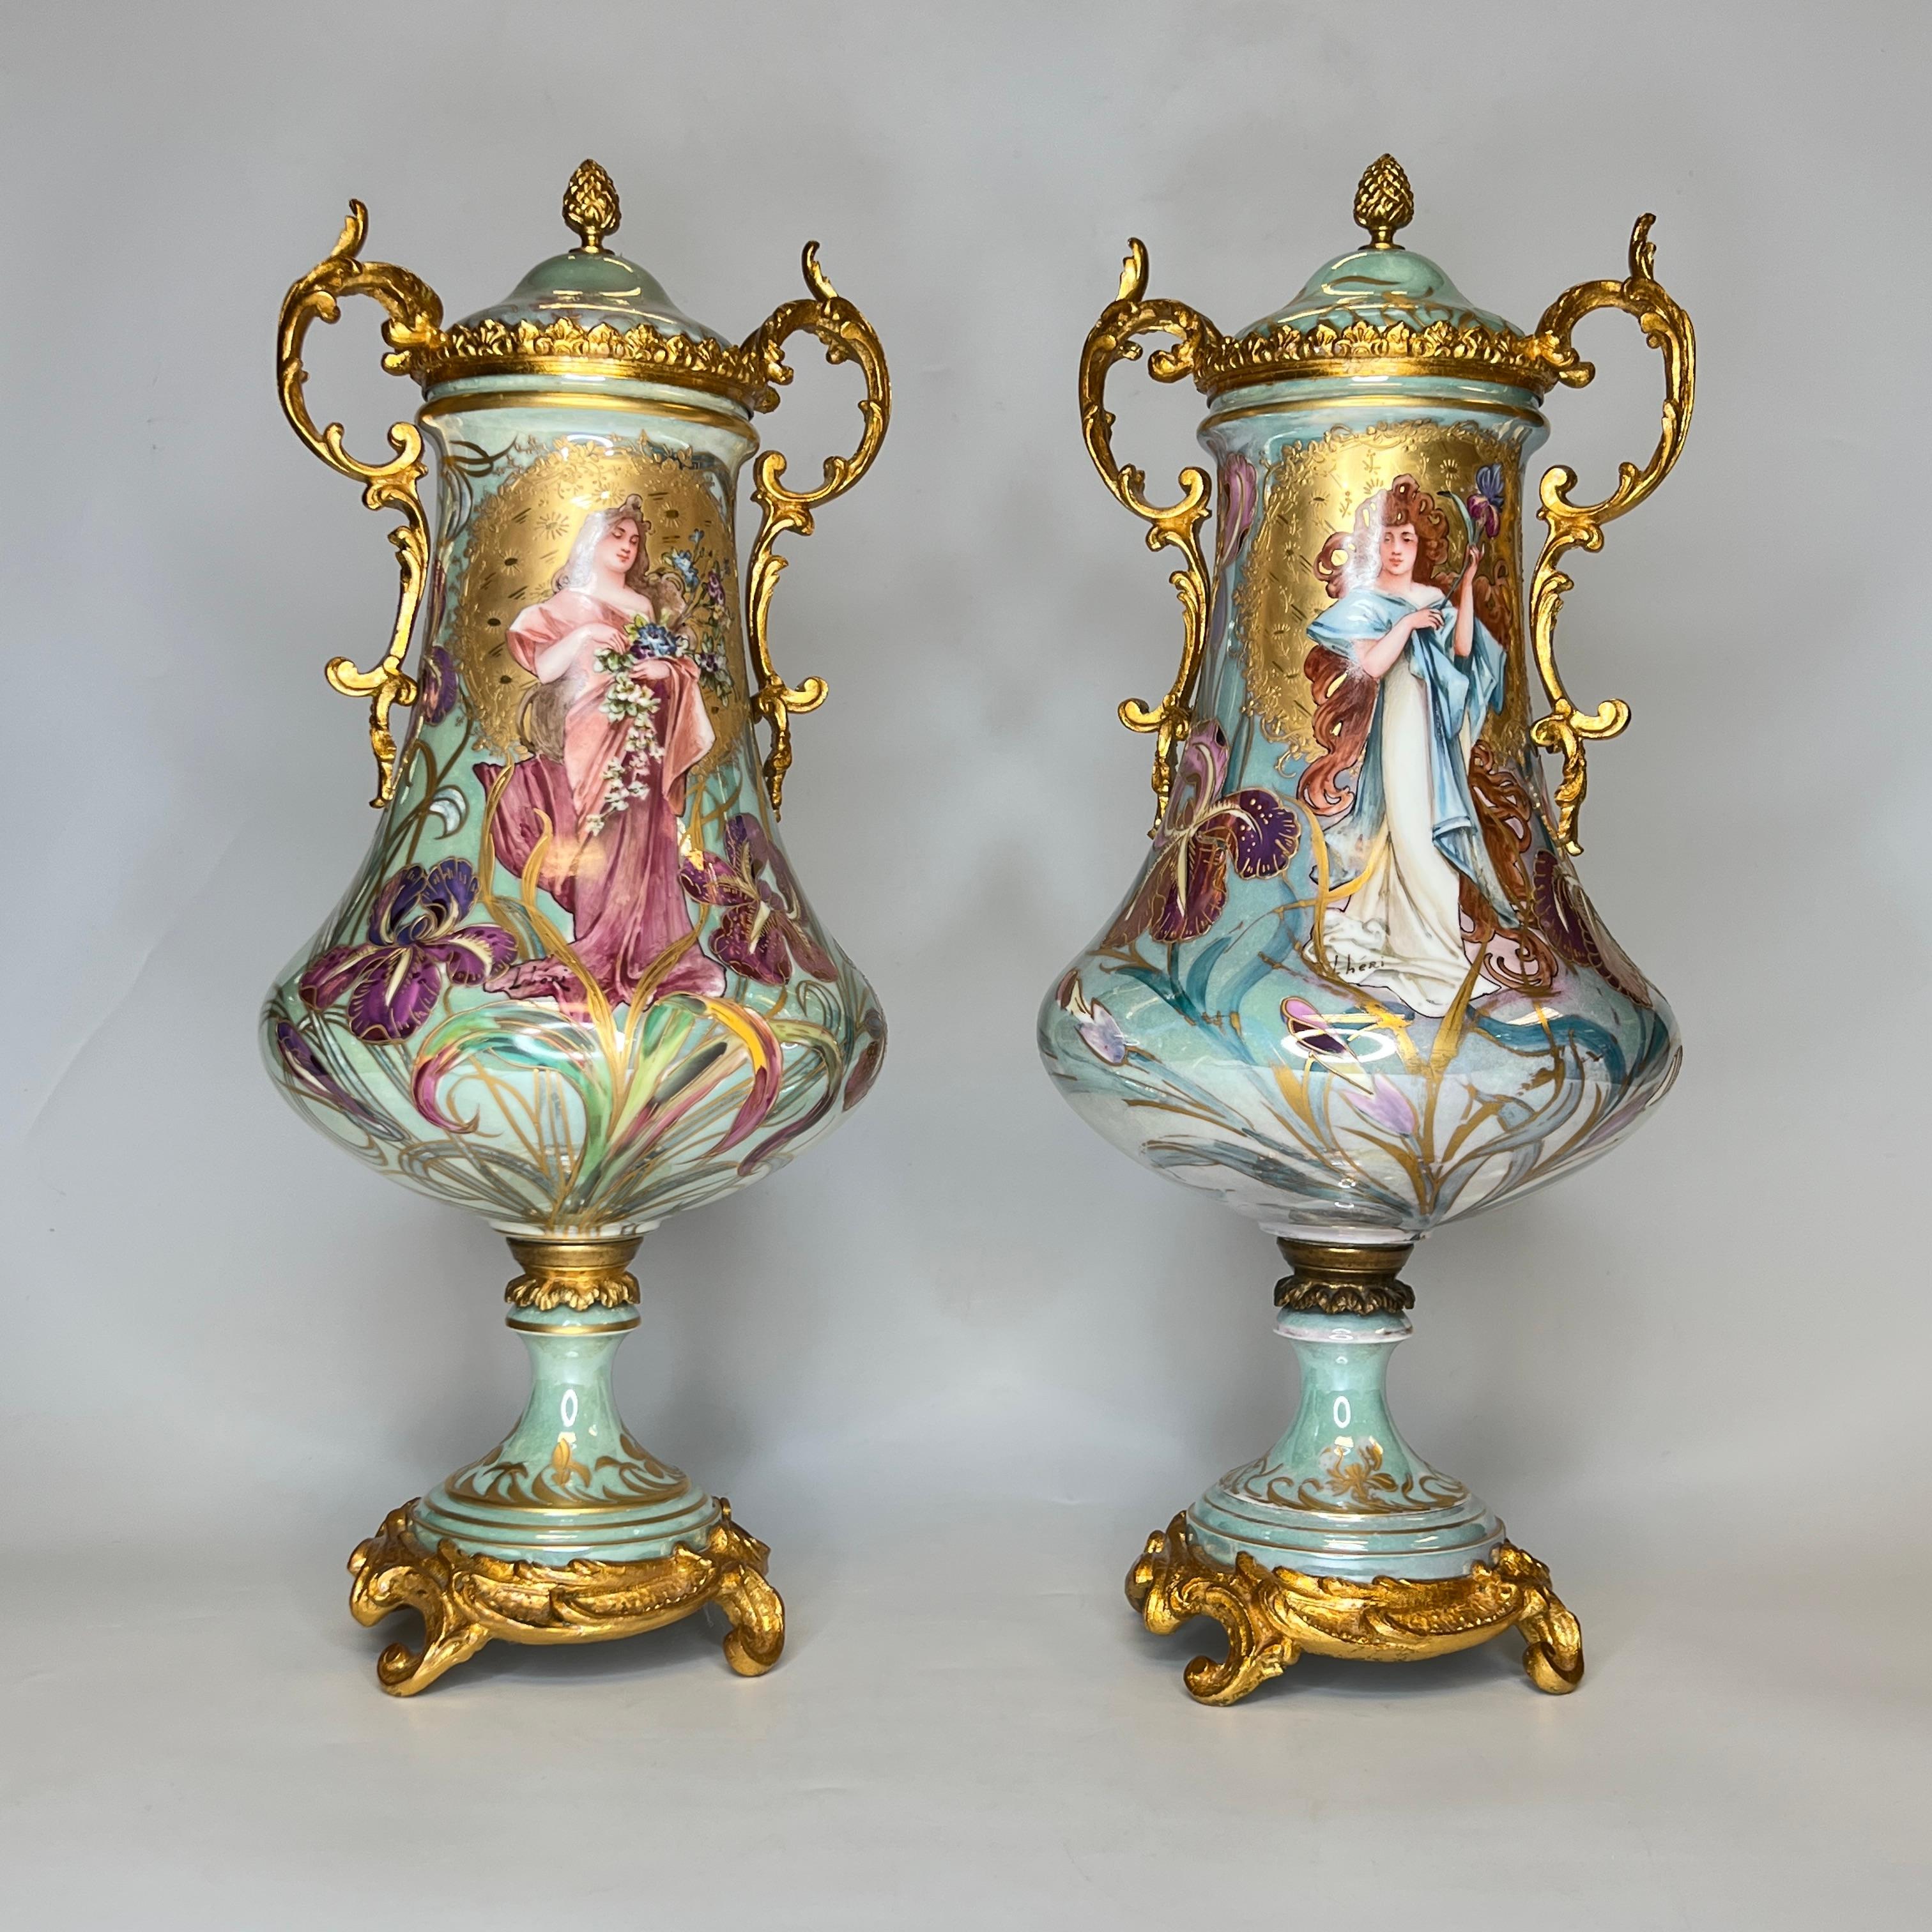 Pair of Art Nouveau Sevres Style Iridescent Porcelain Vases and Covers by Lheri For Sale 10